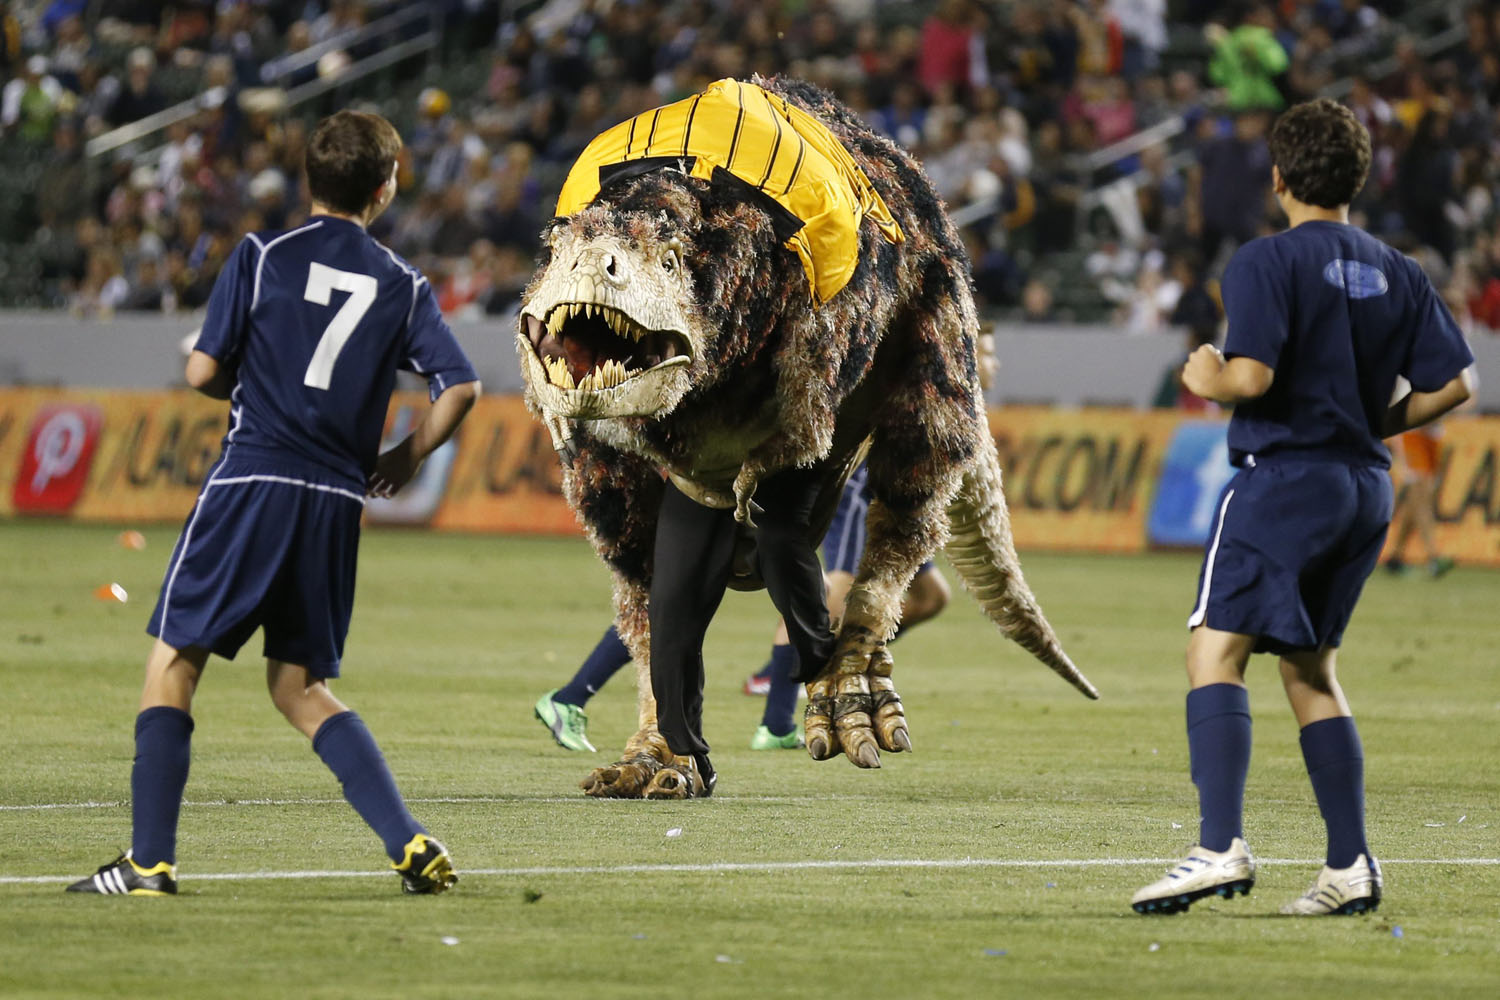 May 26, 2013. A Tyrannosaurus Rex dinosaur costume runs on the field as young boys play an exhibition soccer match during halftime of the MLS soccer game between the Los Angeles Galaxy and Seattle Sounders FC in Carson, California. The dinosaur was on the field to promote the Natural History Museum of Los Angeles County.